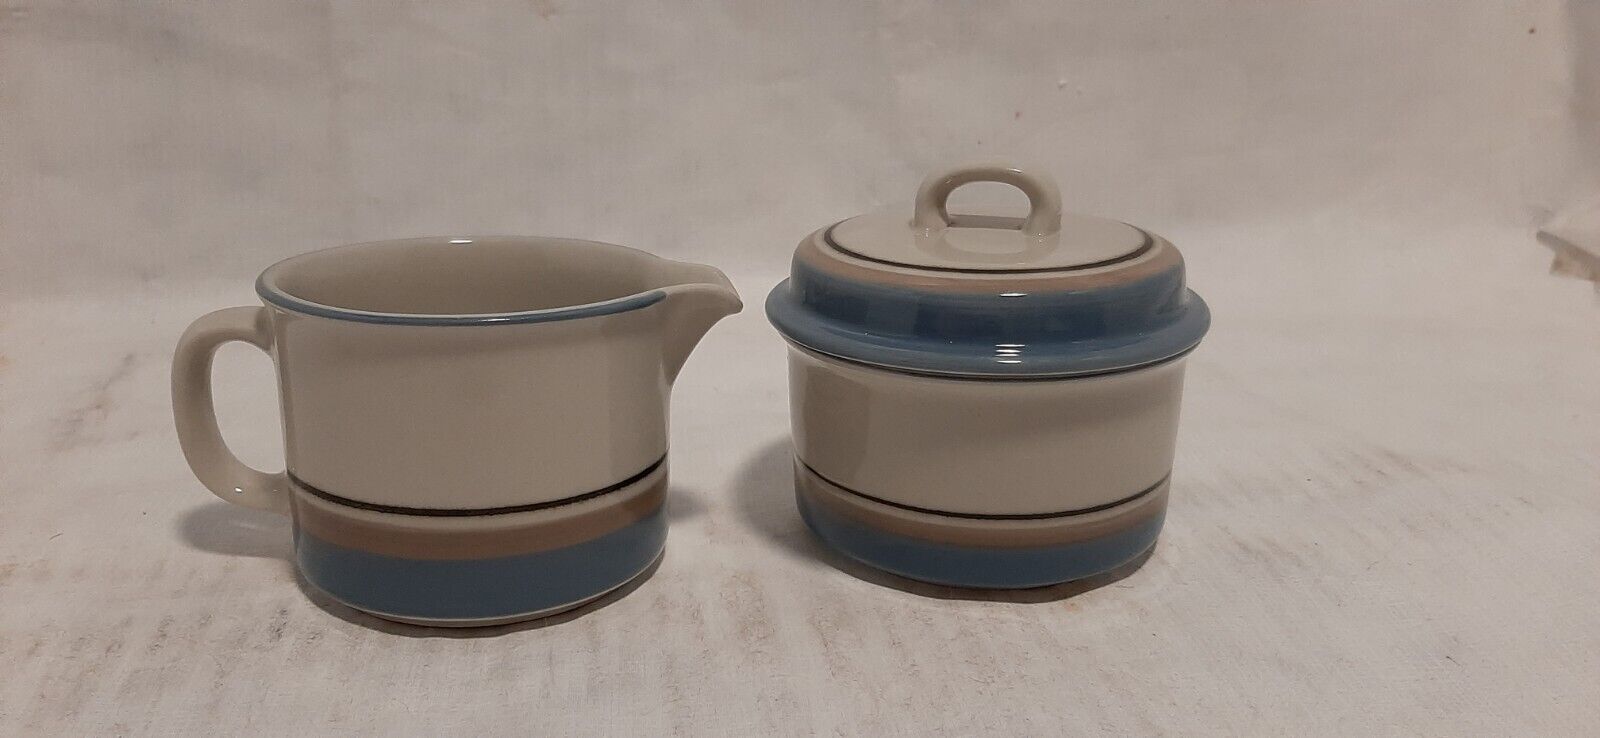 Read more about the article ARABIA OF FINLAND UHTUA SUGAR BOWL WITH LID AND CREAMER